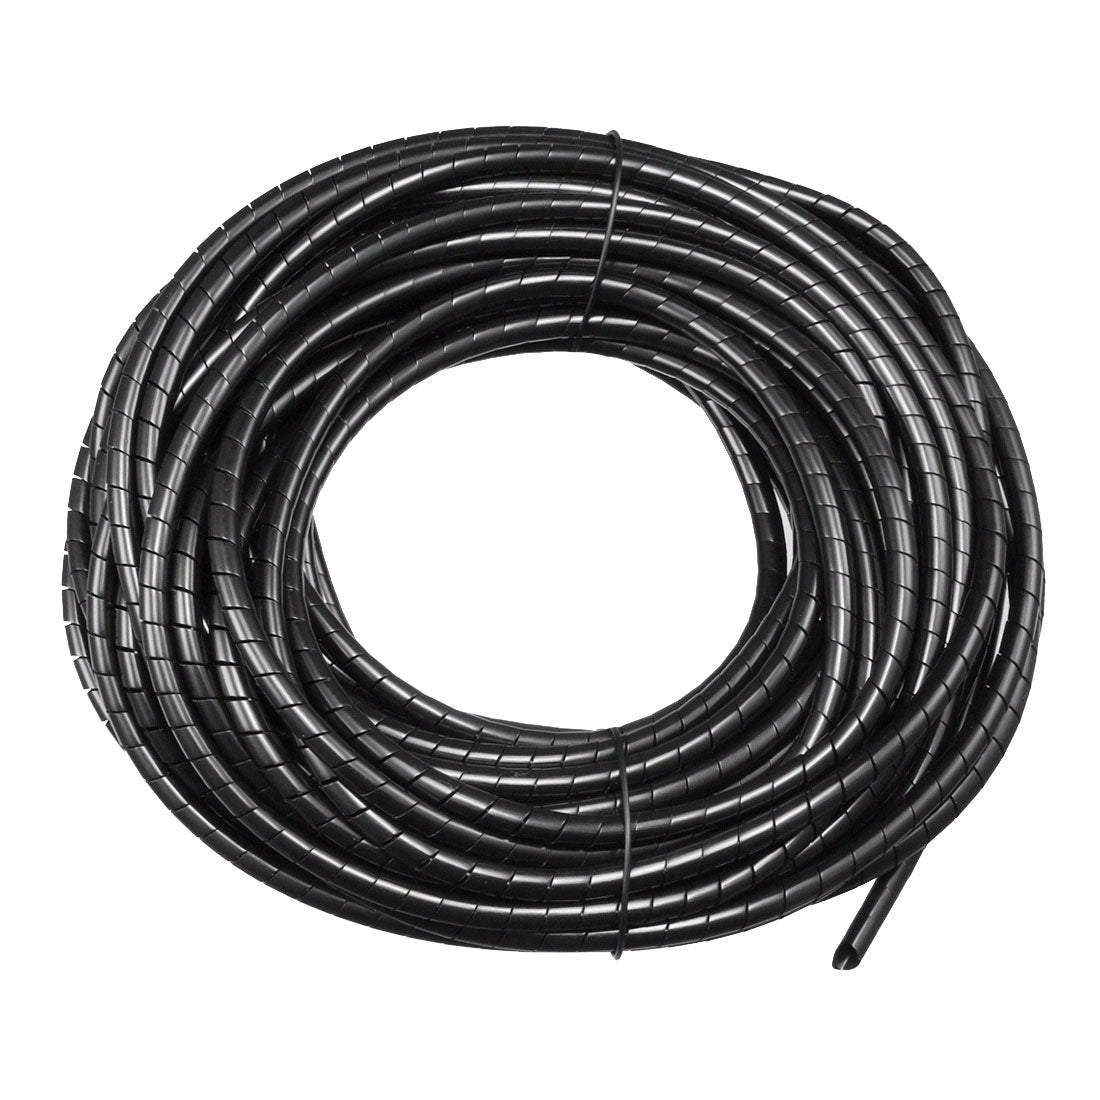 uxcell Uxcell 4mm Flexible Spiral Tube Cable Wire Wrap Computer Manage Cord Black 14-15M